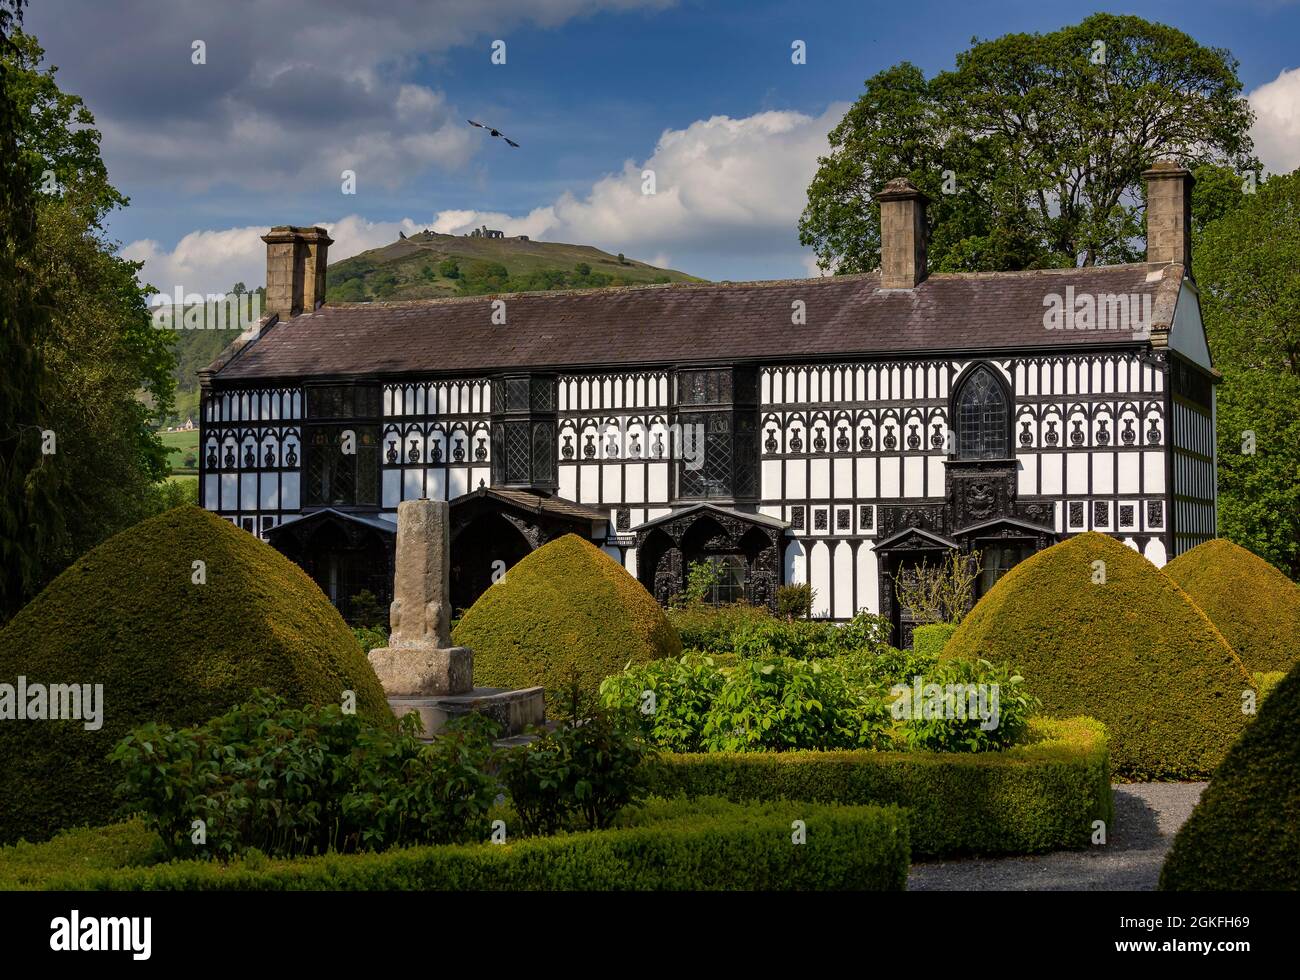 Plas Newydd is a historic house in the town of Llangollen, Denbighshire, Wales, former home  of Lady Eleanor Butler and Sarah Ponsonby. Stock Photo